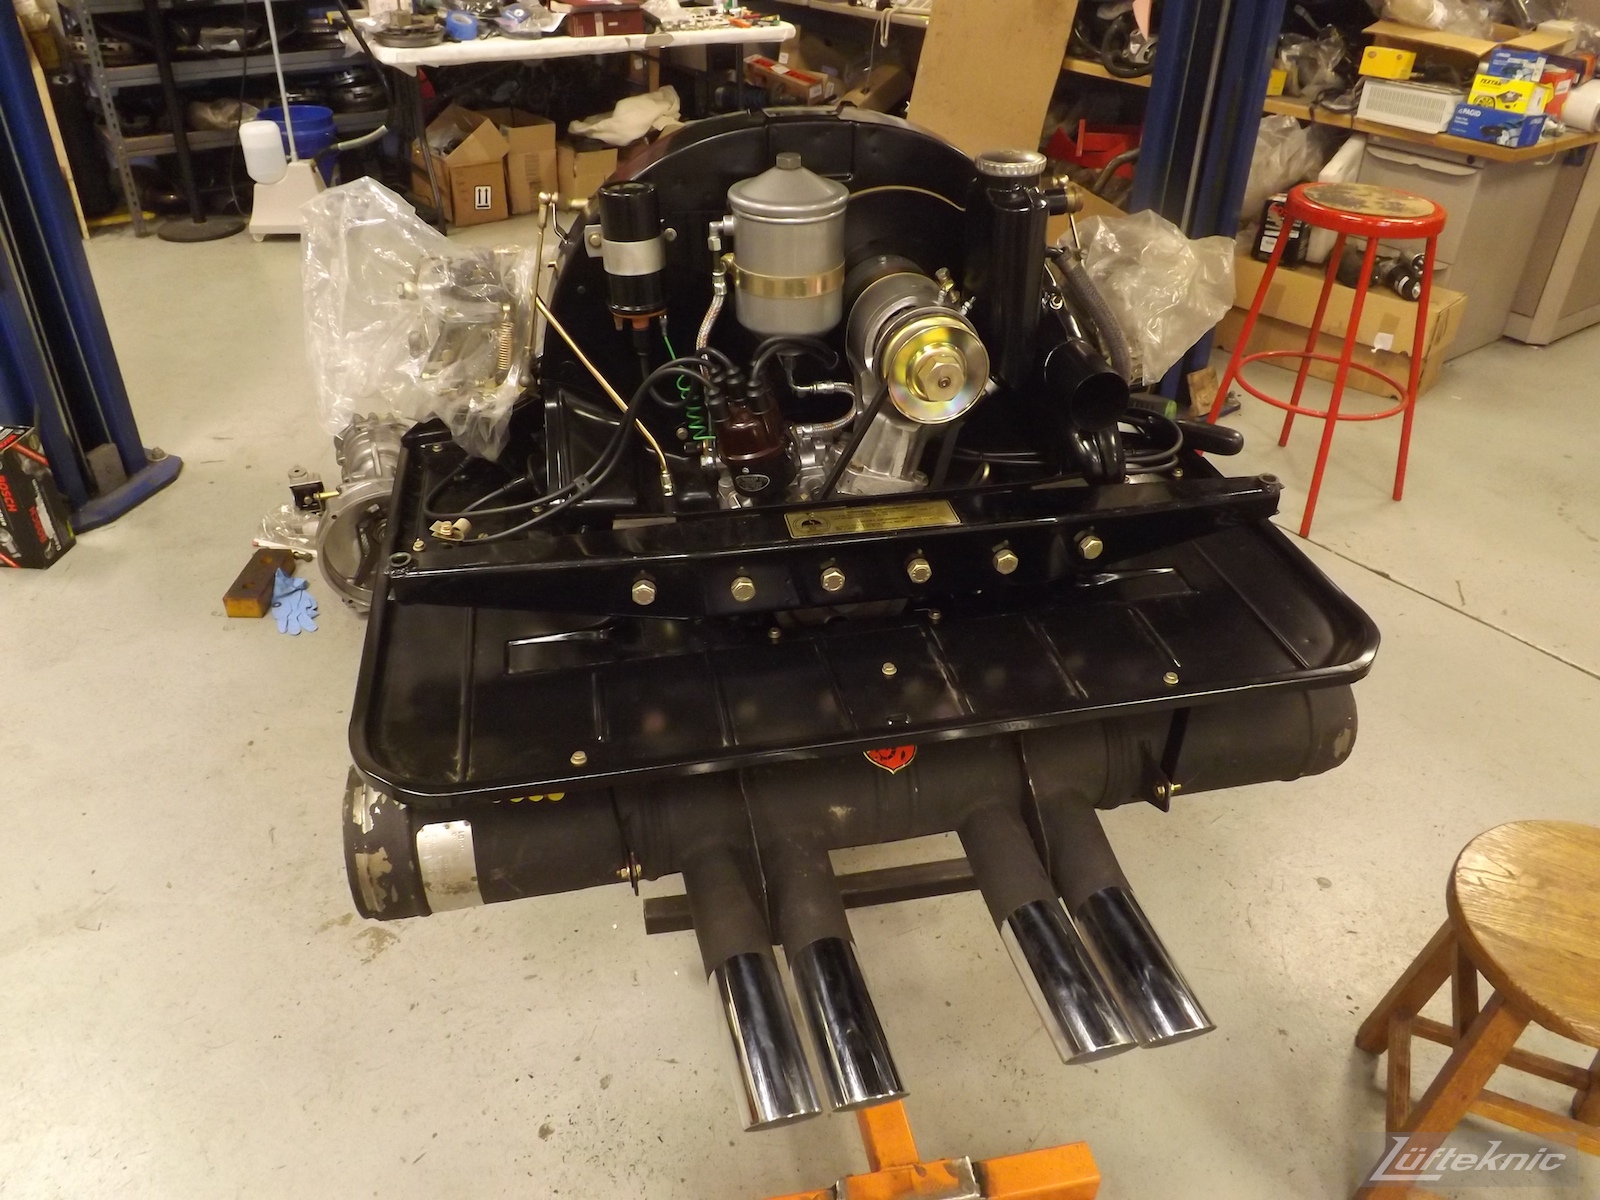 Complete engine with tins ready for install for an Irish Green Porsche 912 undergoing restoration at Lufteknic.